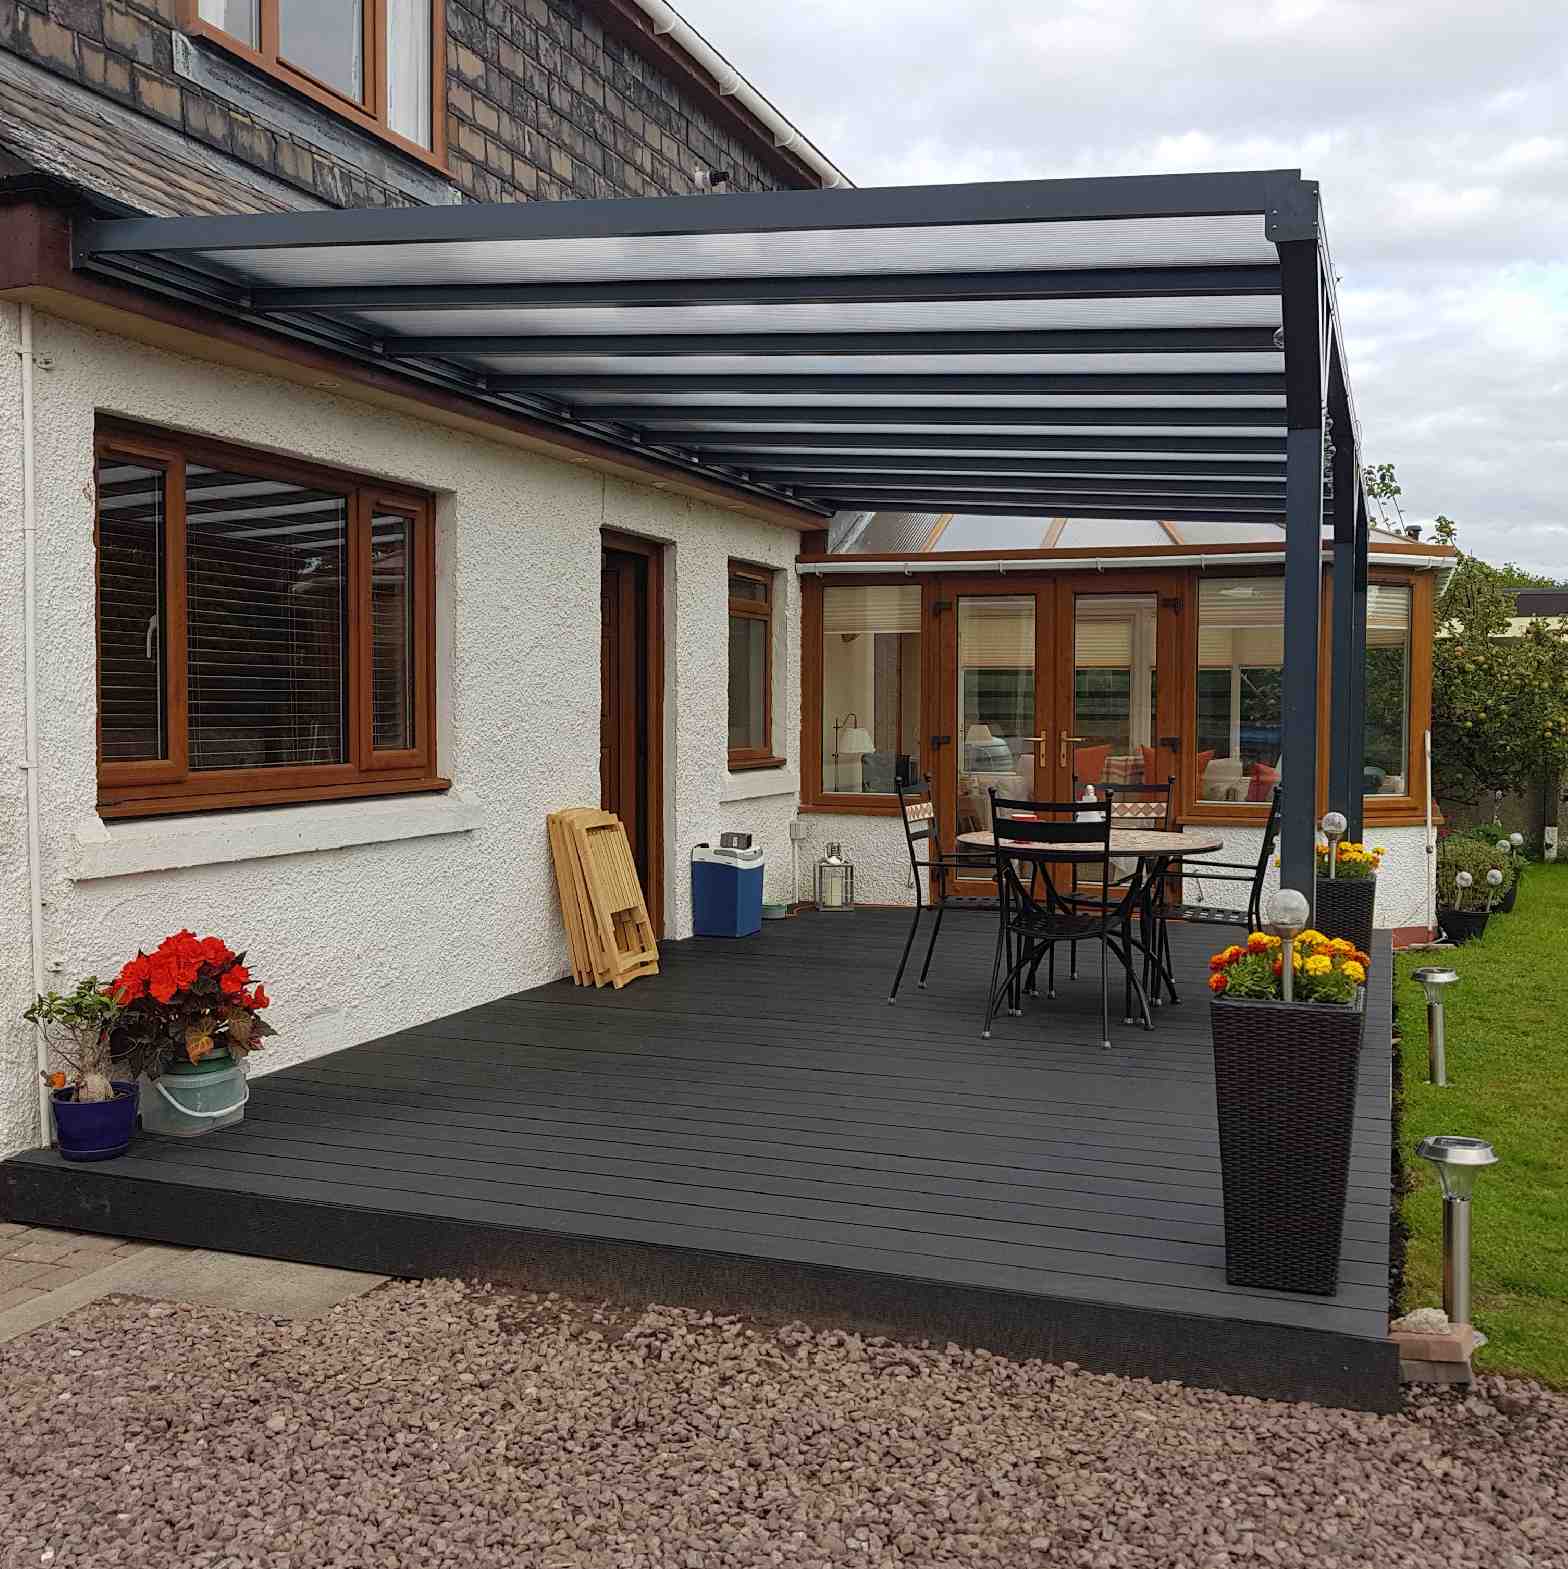 Buy Omega Verandah, Anthracite Grey, 16mm Polycarbonate Glazing - 6.3m (W) x 1.5m (P), (4) Supporting Posts online today